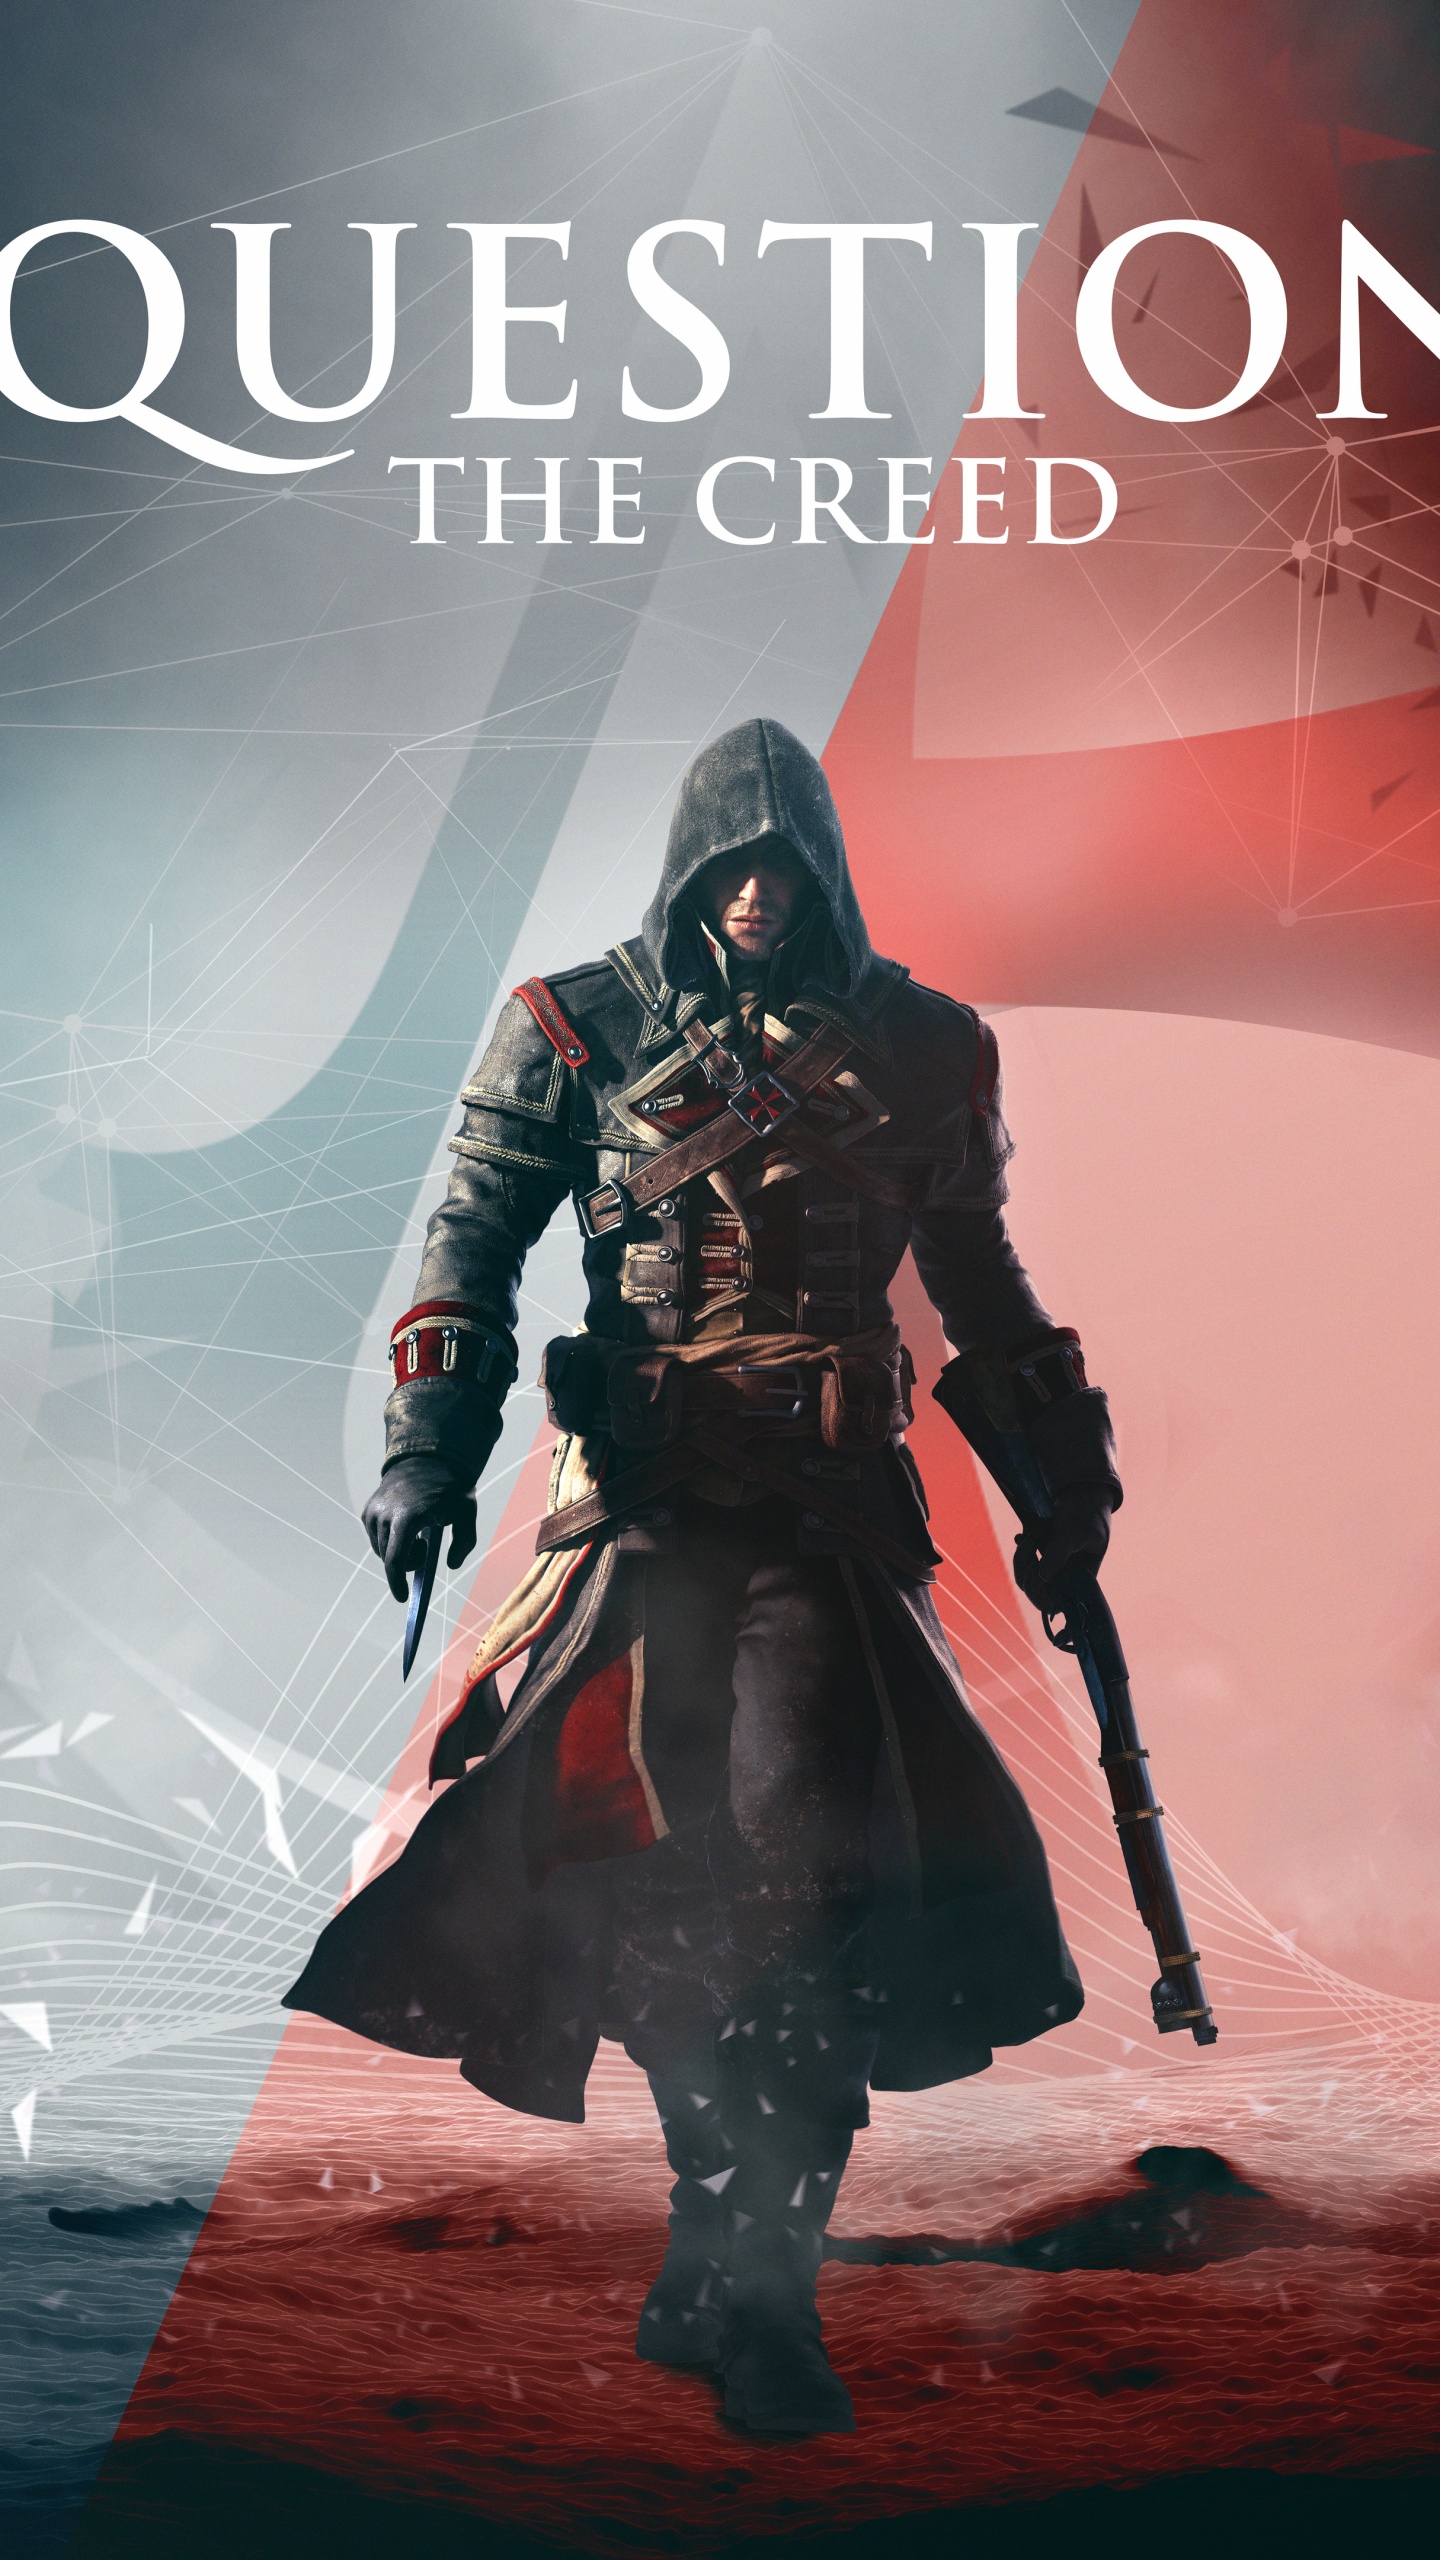 Assassins Creed Rogue, Assassins Creed Unity, Assassins Creed, Assassins Creed Brotherhood, Jeu D'aventure. Wallpaper in 1440x2560 Resolution